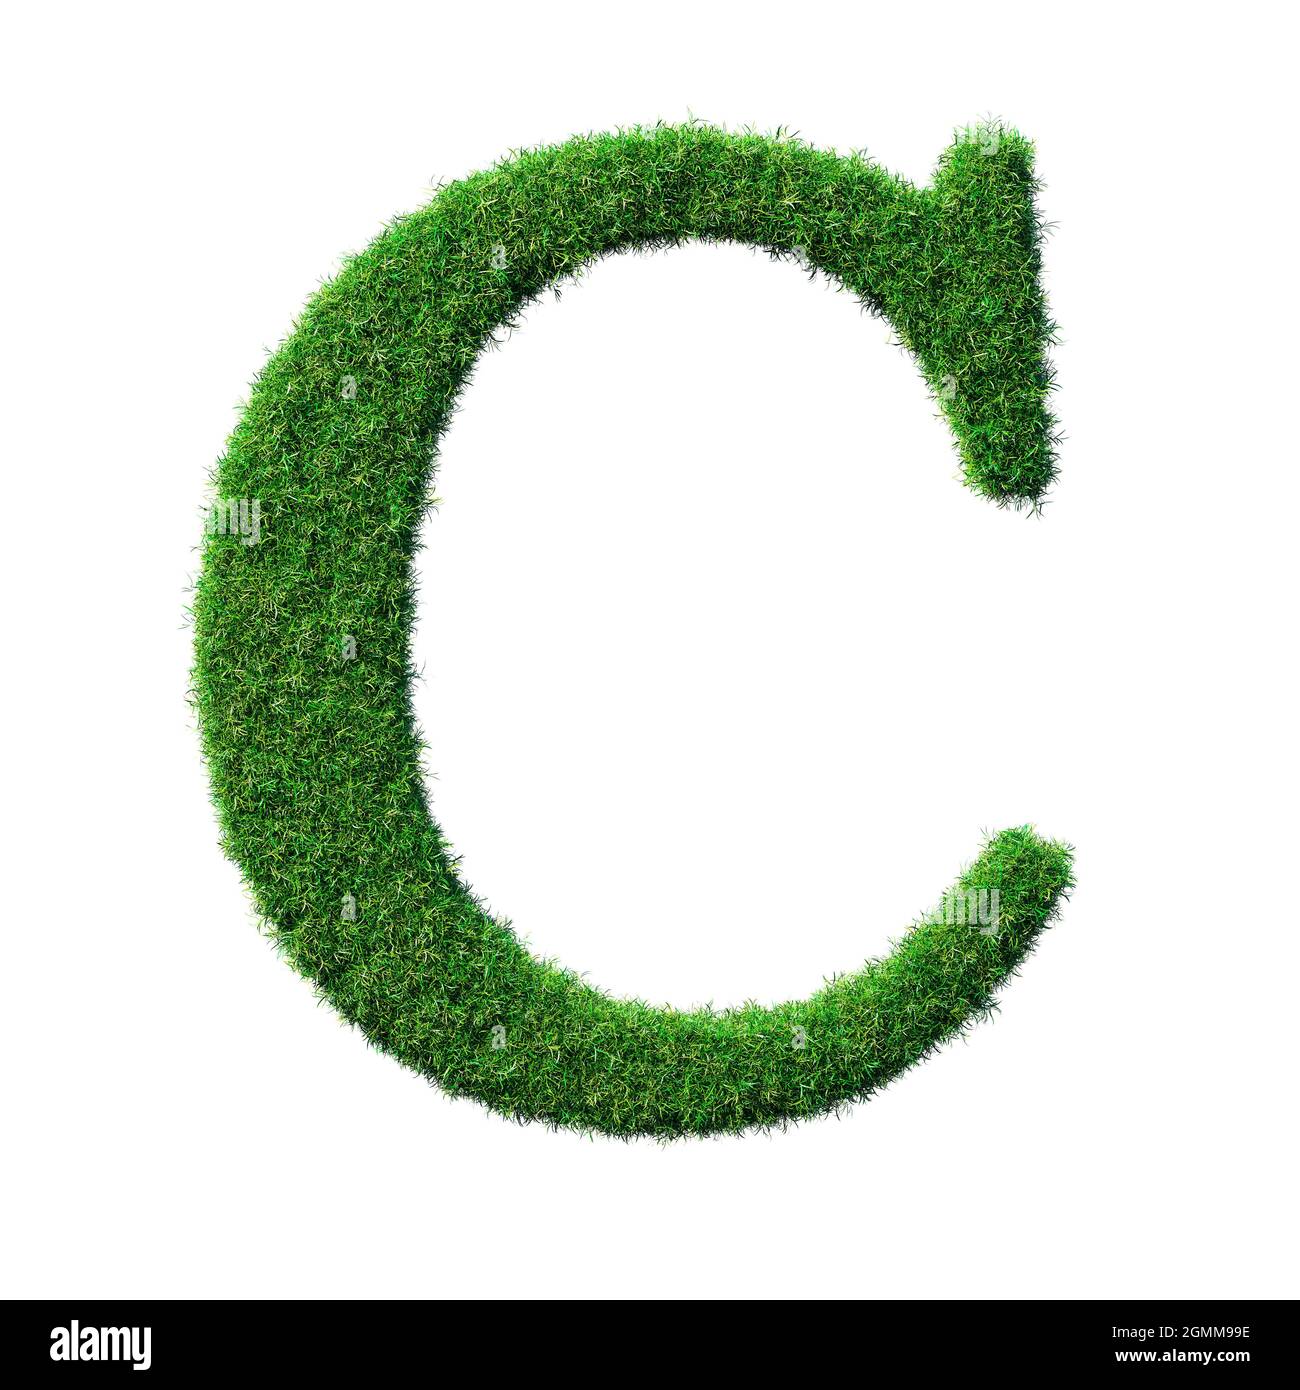 Letter C made of green grass isolated on white Background 3D-Illustration - Part of a series Stock Photo